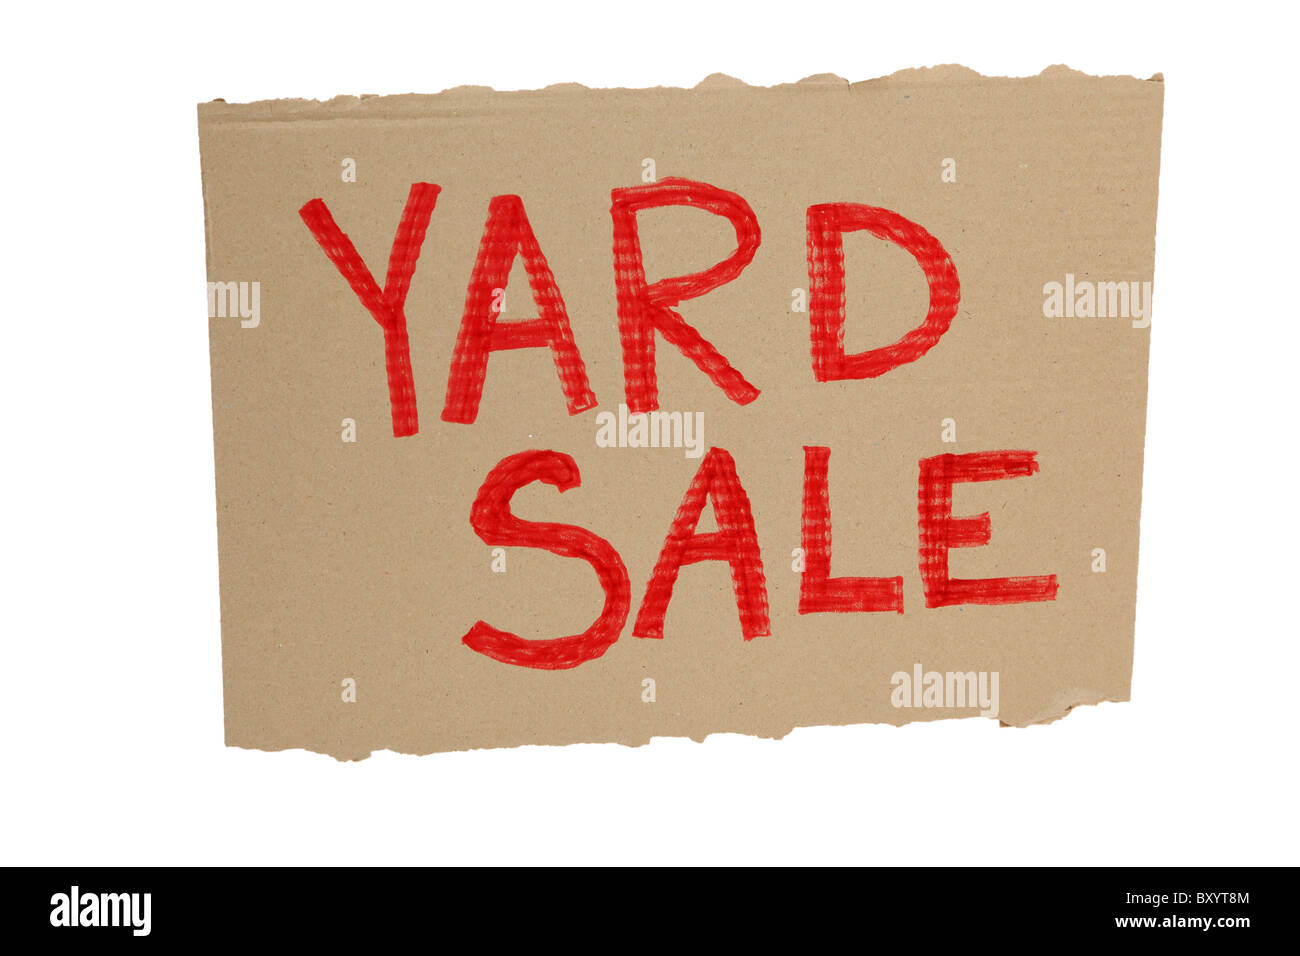 Carton yard sale sign on white background Banque D'Images